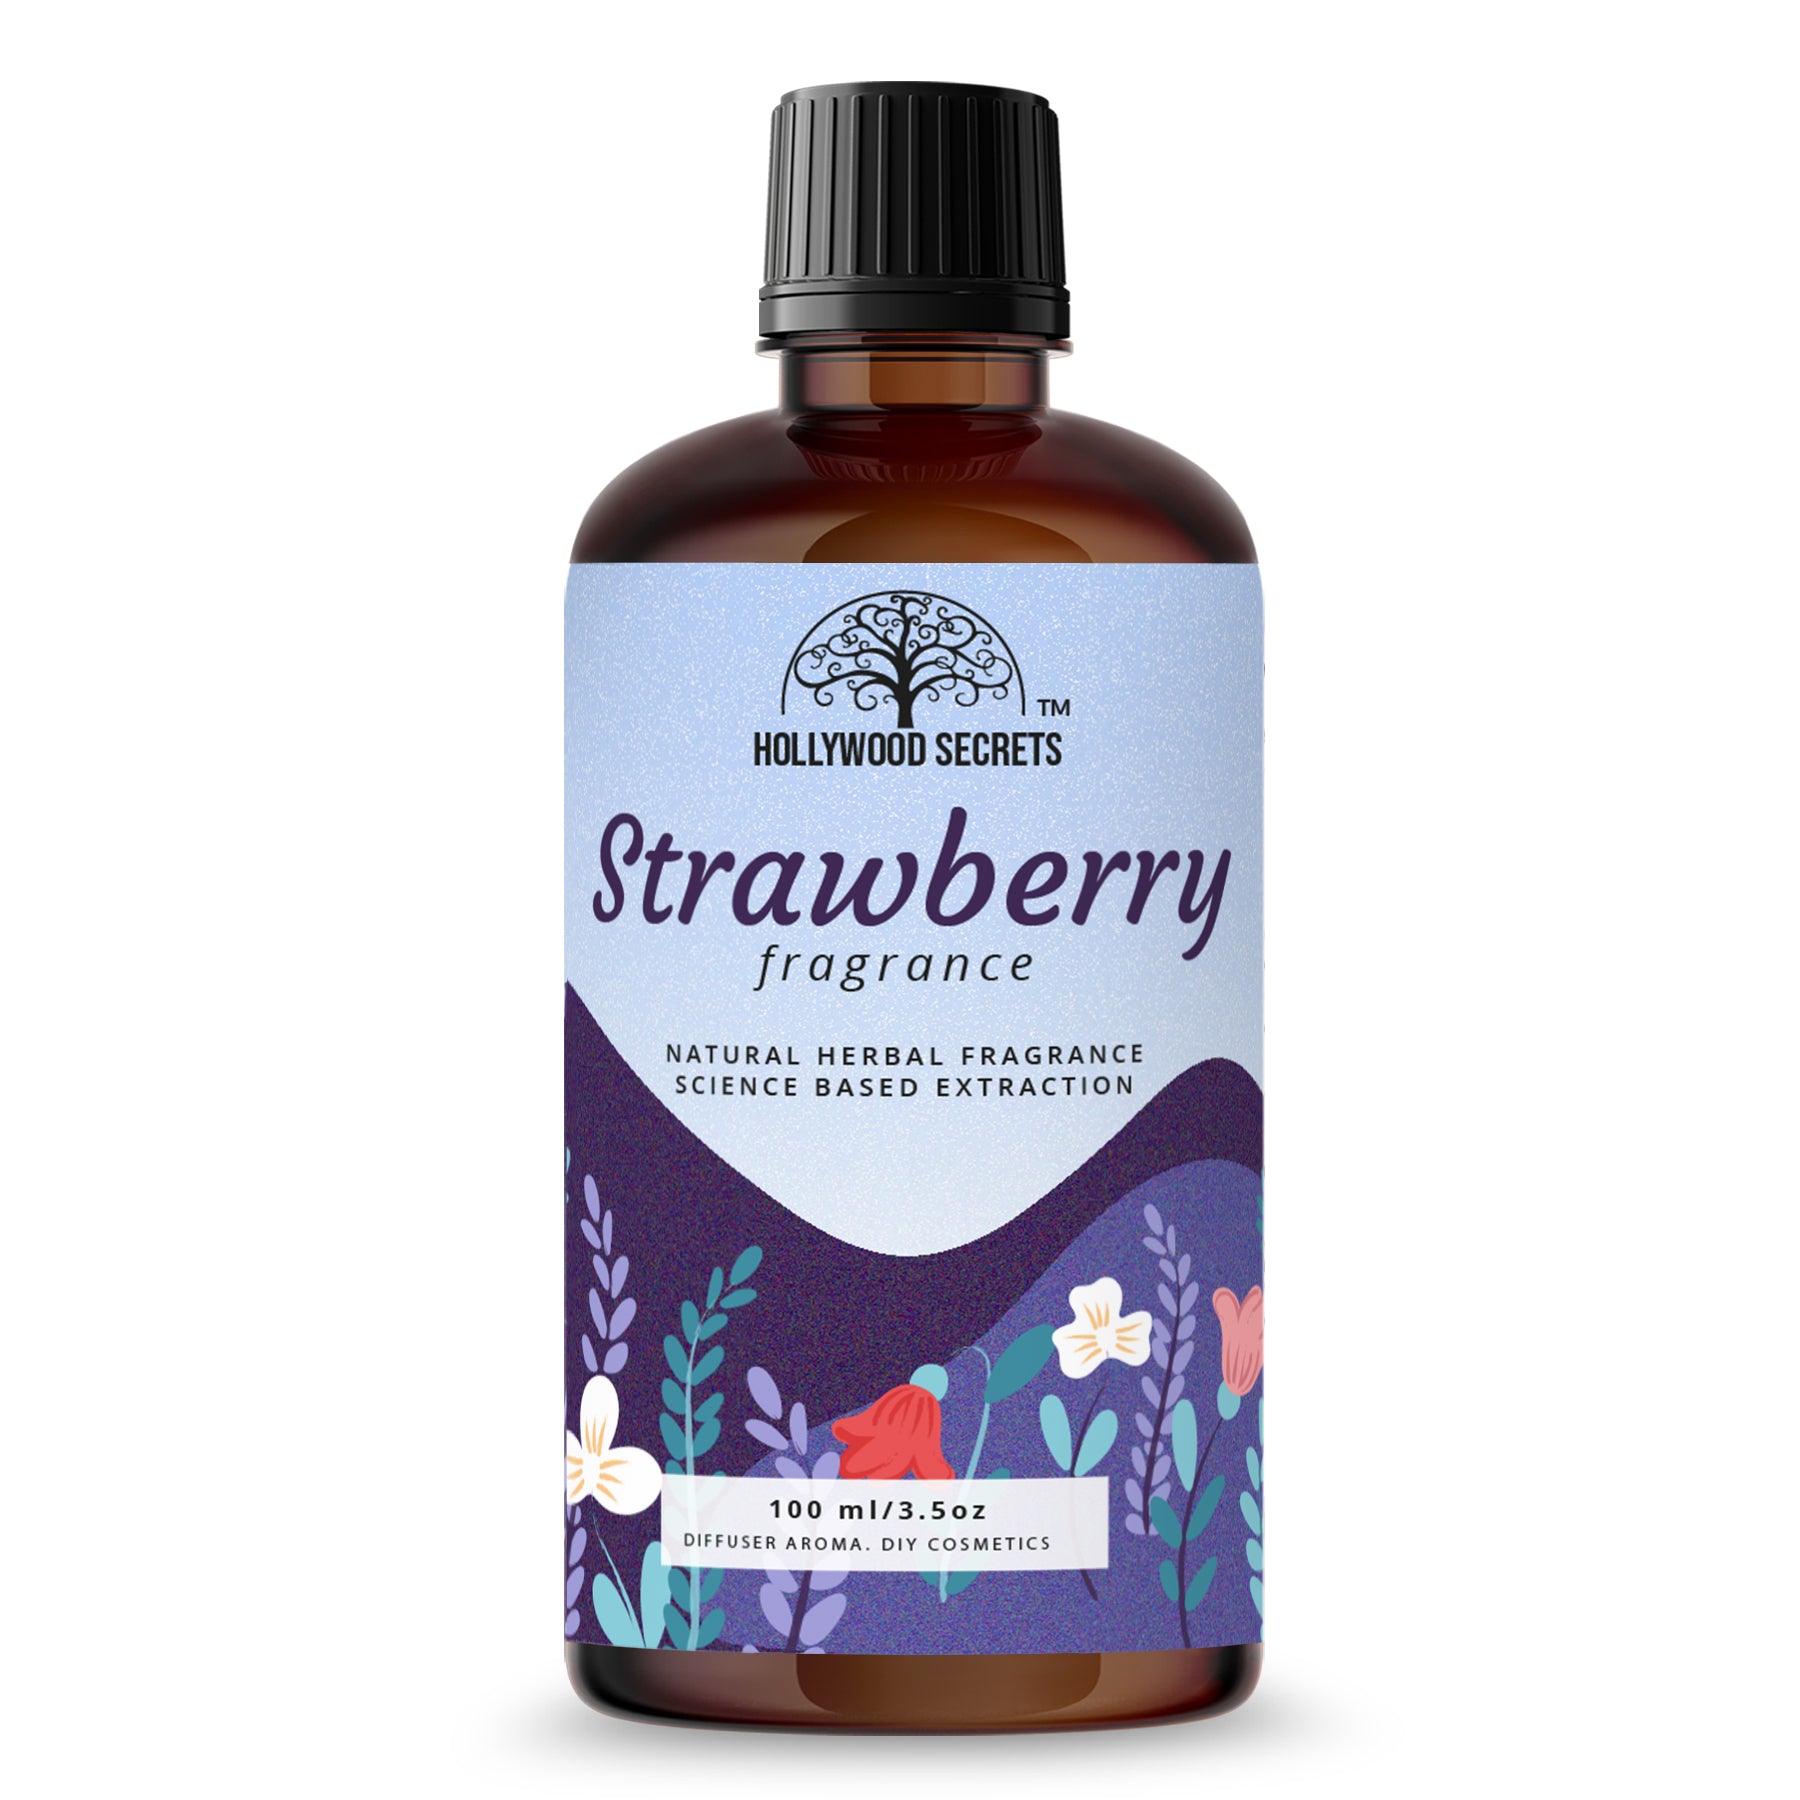 Pure Strawberry Fragrance Liquid For Diffuser And Cosmetic 100ml Hollywood Secrets